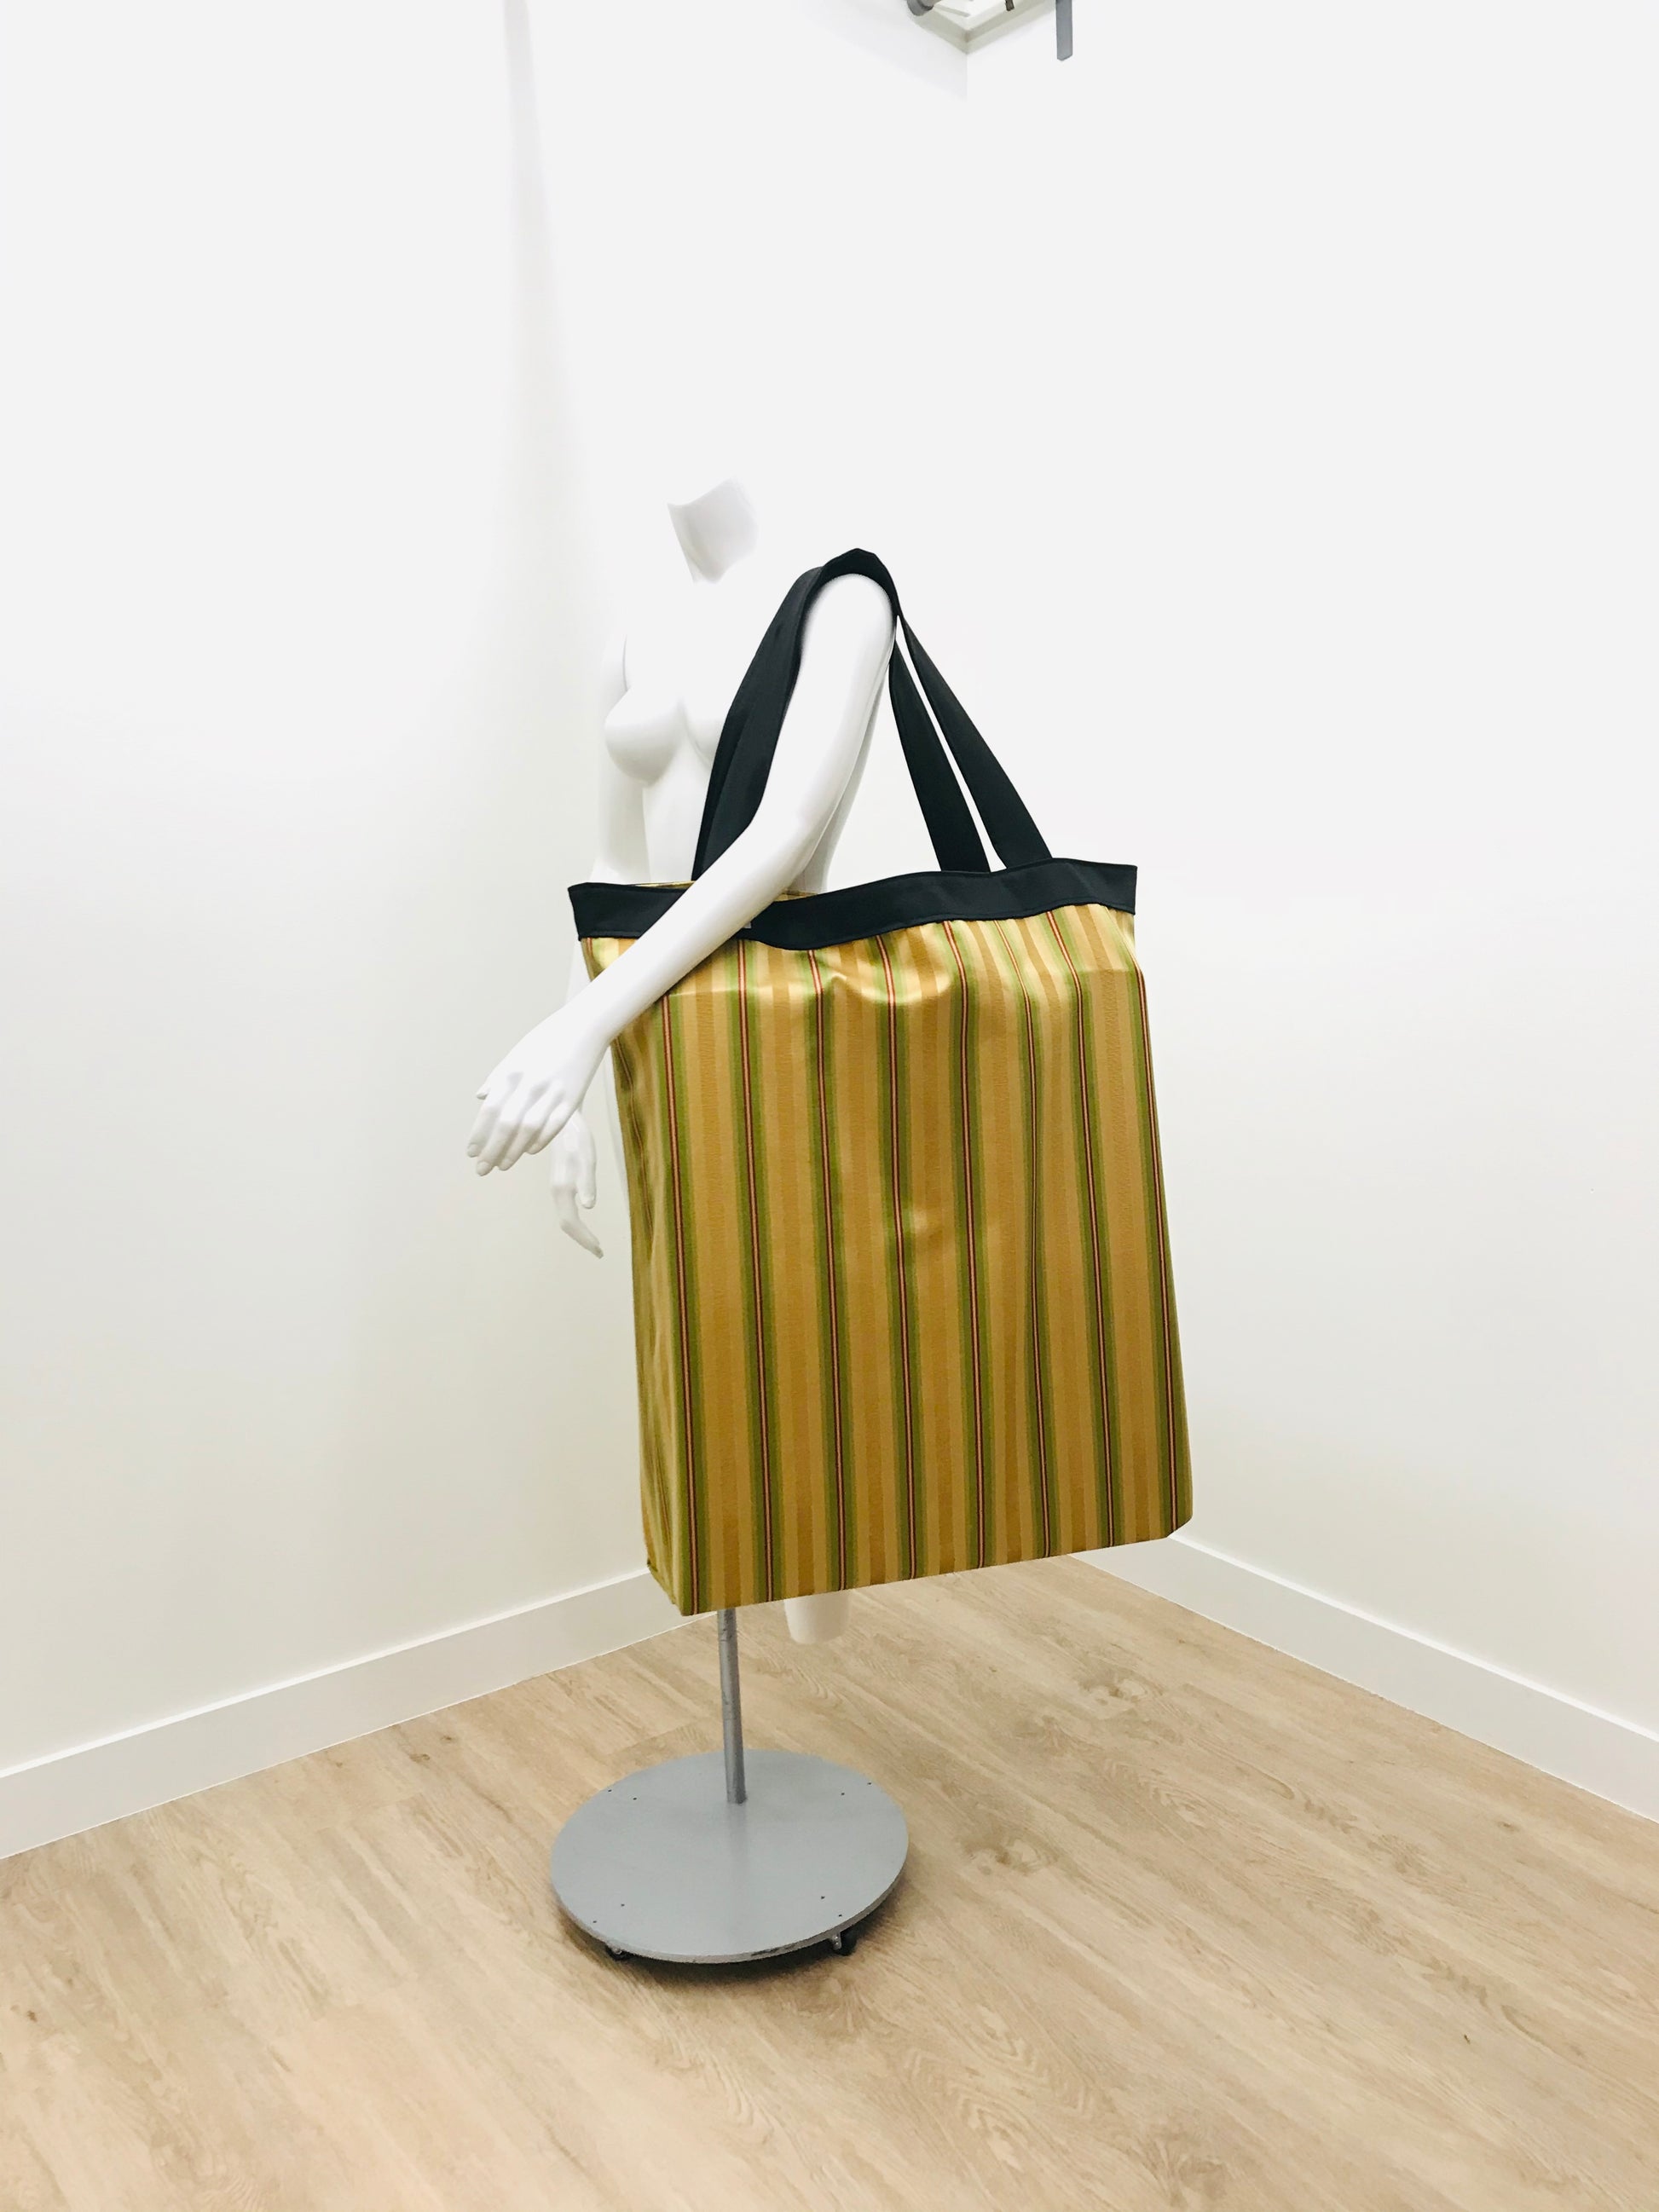 Extra Large Yoga Tote Bag in red, green, gold stripe print to carry and or store yoga props for yoga practice. Made in Canada by My Yoga Room Elements